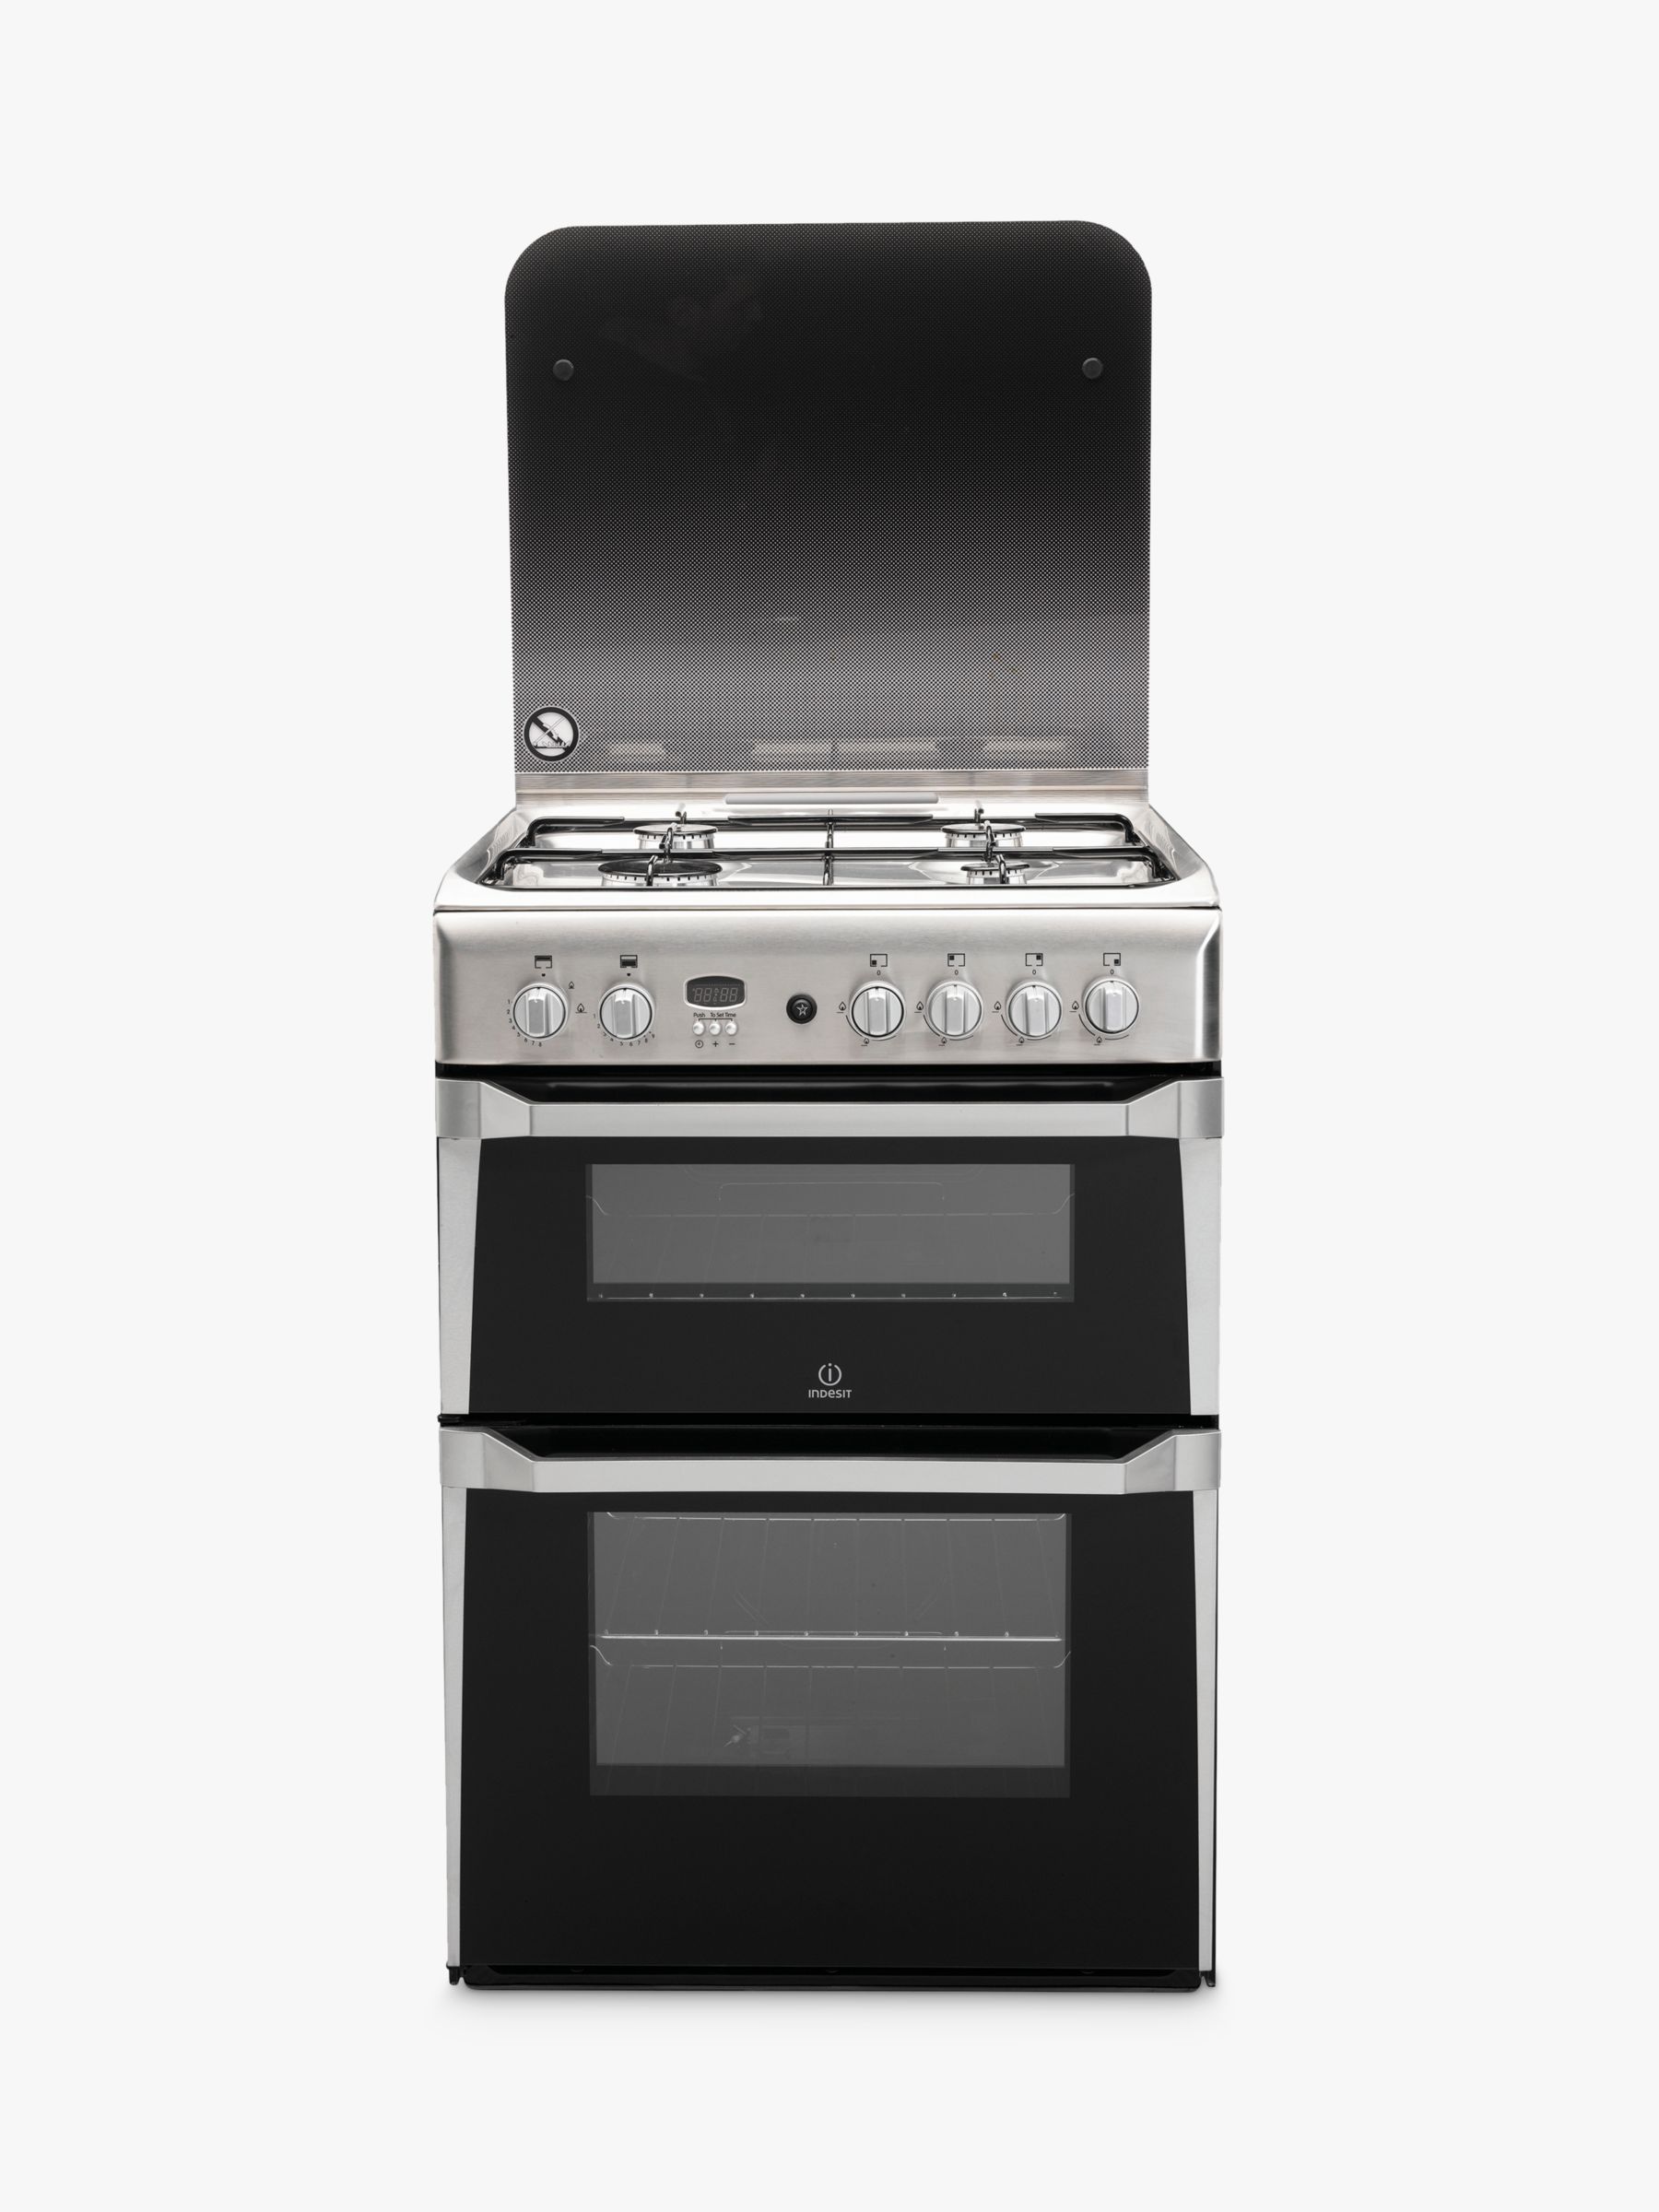 Indesit ID60G2X Gas Cooker, Stainless Steel